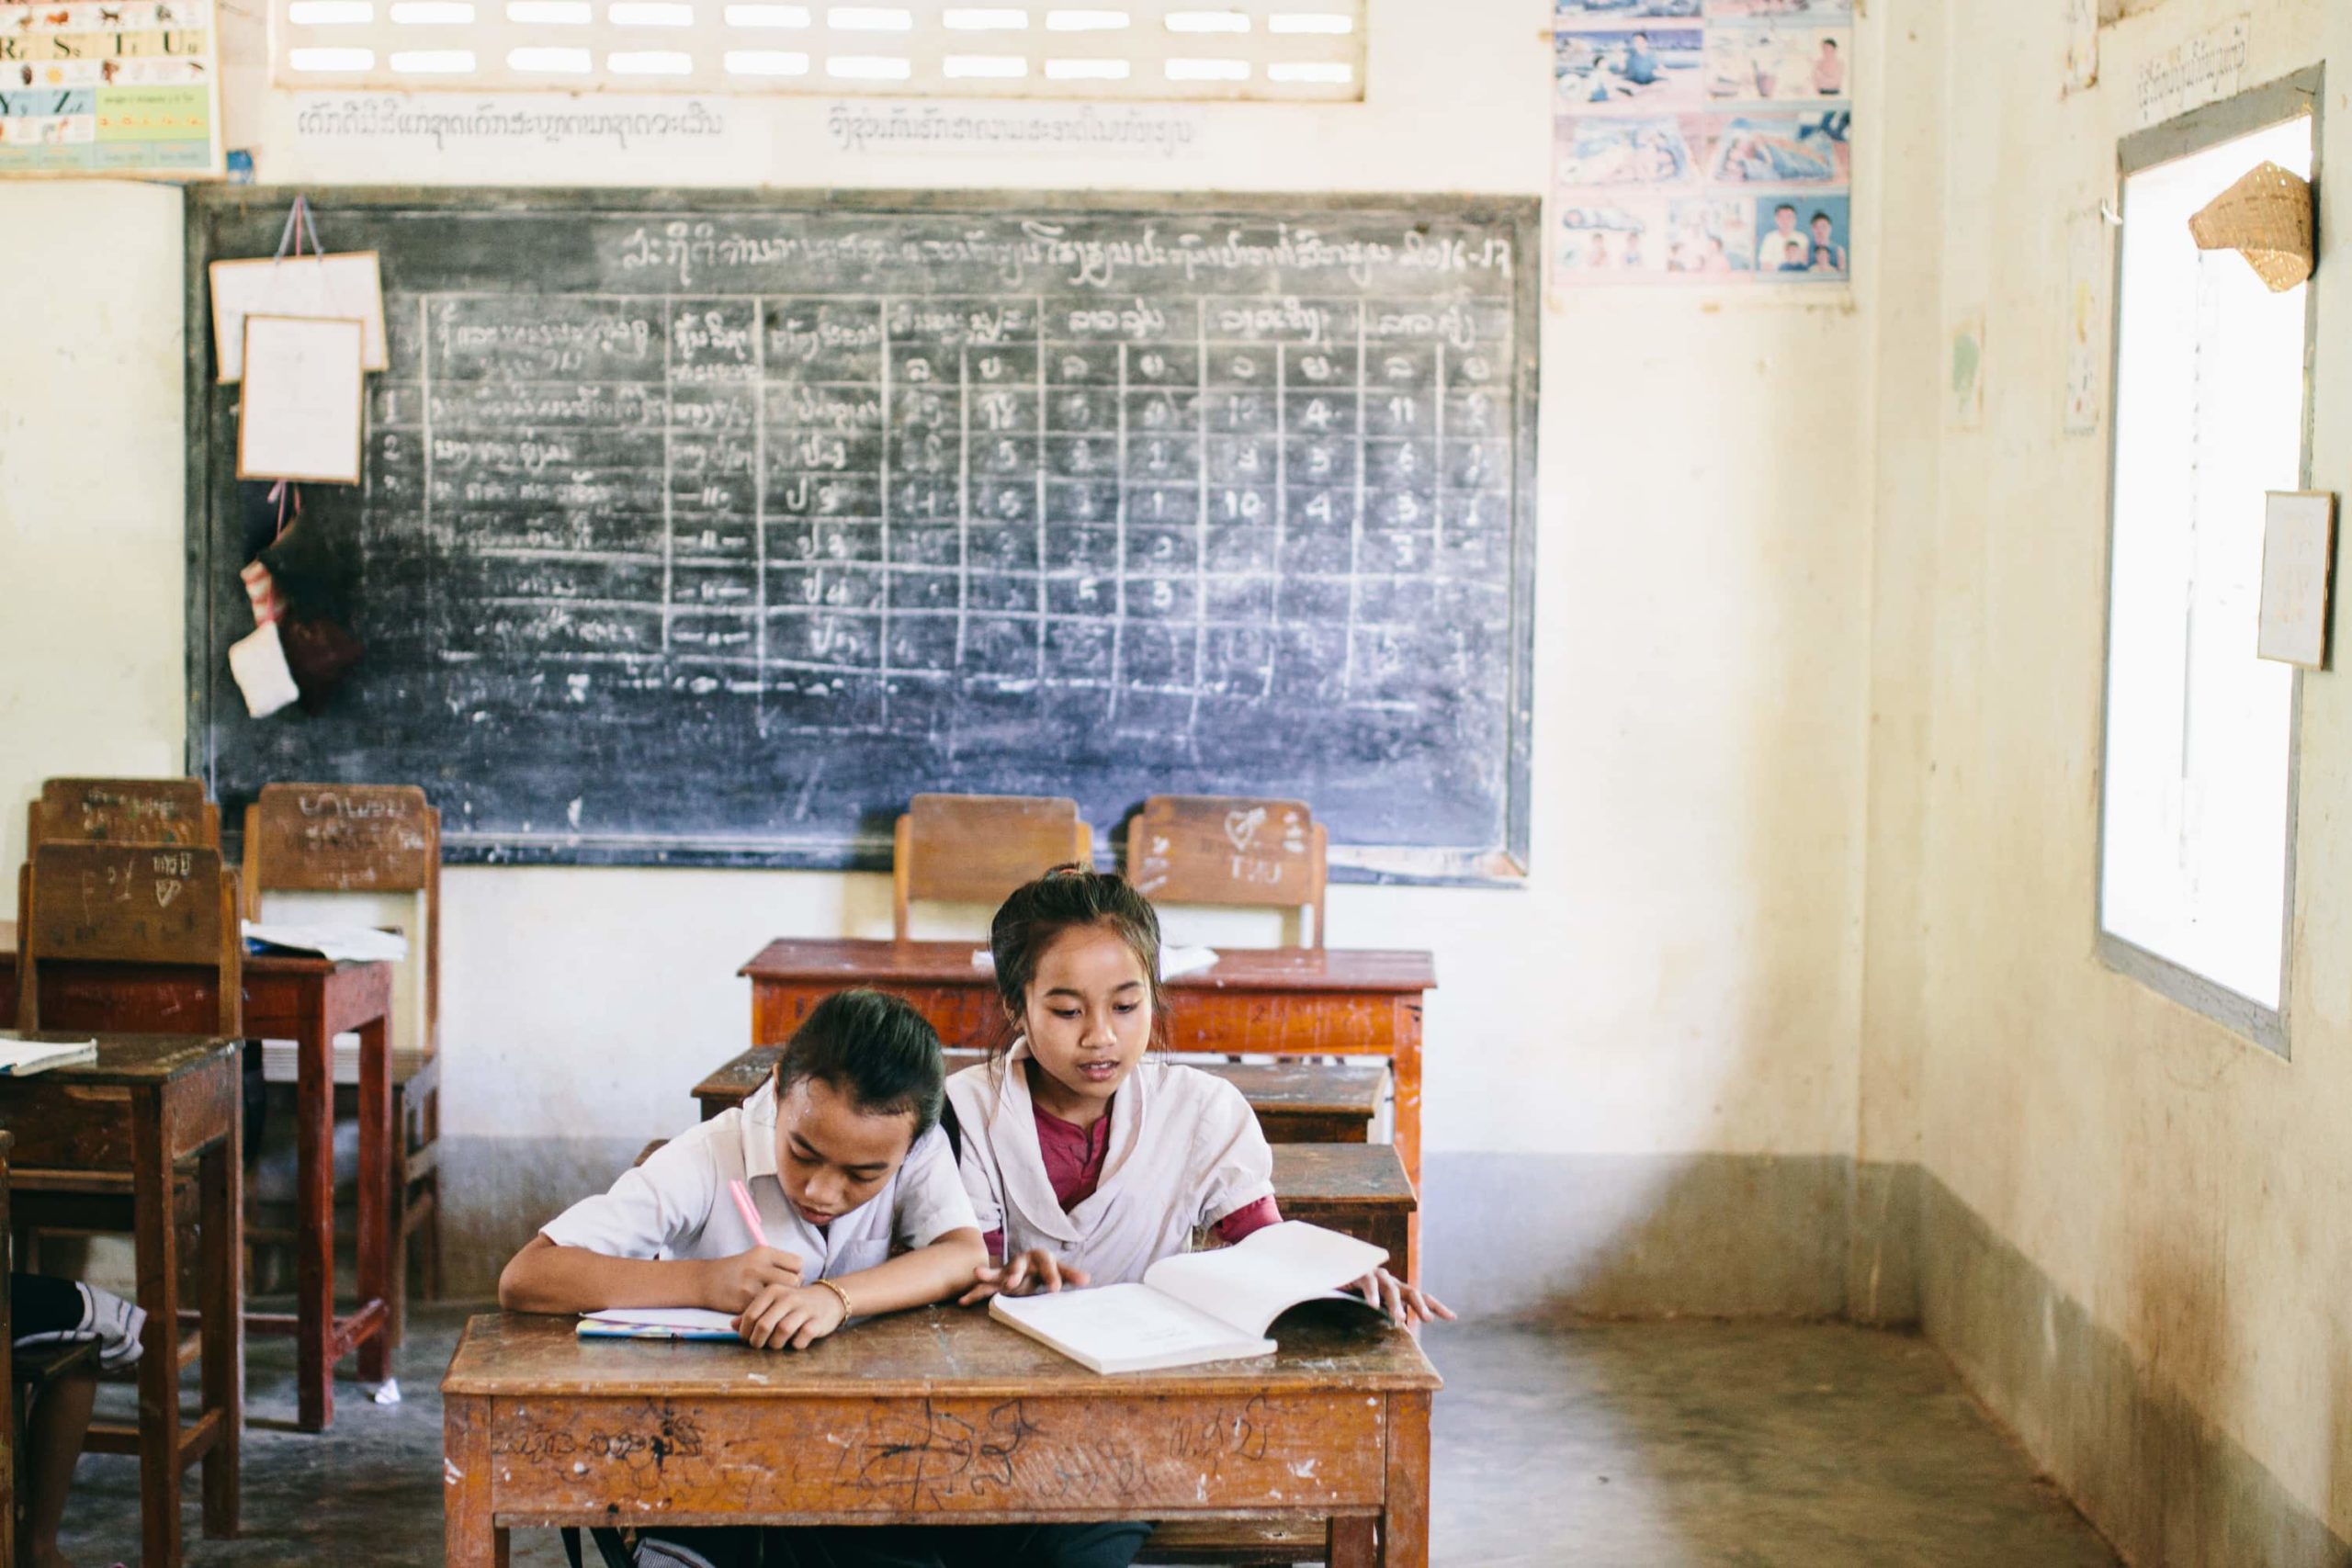 Two students share a desk inside a classroom in Laos with a chalkboard on the wall behind them.